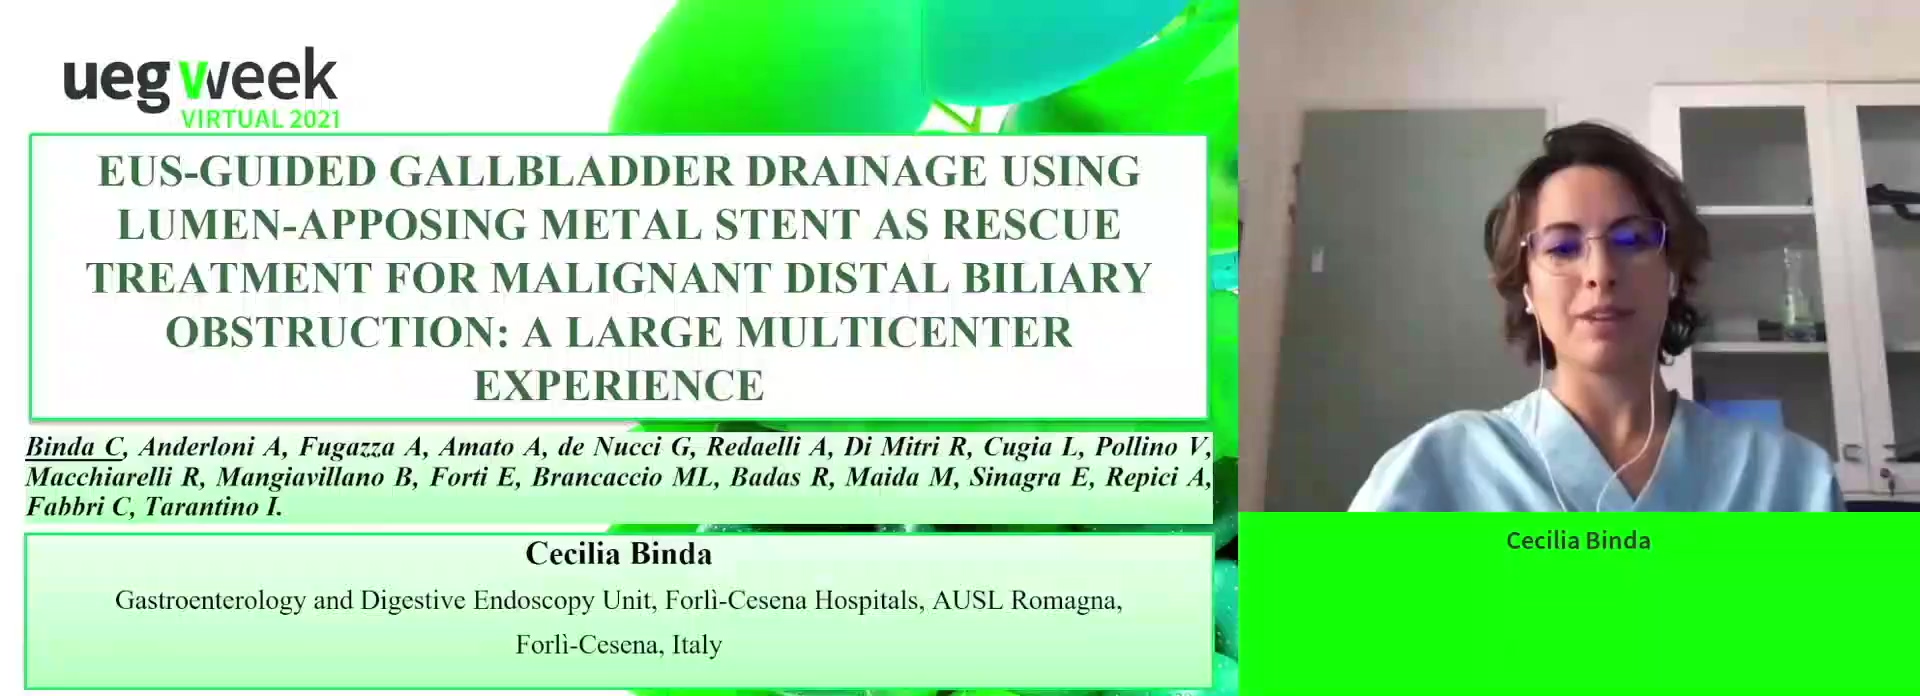 EUS-GUIDED GALLBLADDER DRAINAGE USING LUMEN-APPOSING METAL STENT AS RESCUE TREATMENT FOR MALIGNANT DISTAL BILIARY OBSTRUCTION: A LARGE MULTICENTER EXPERIENCE